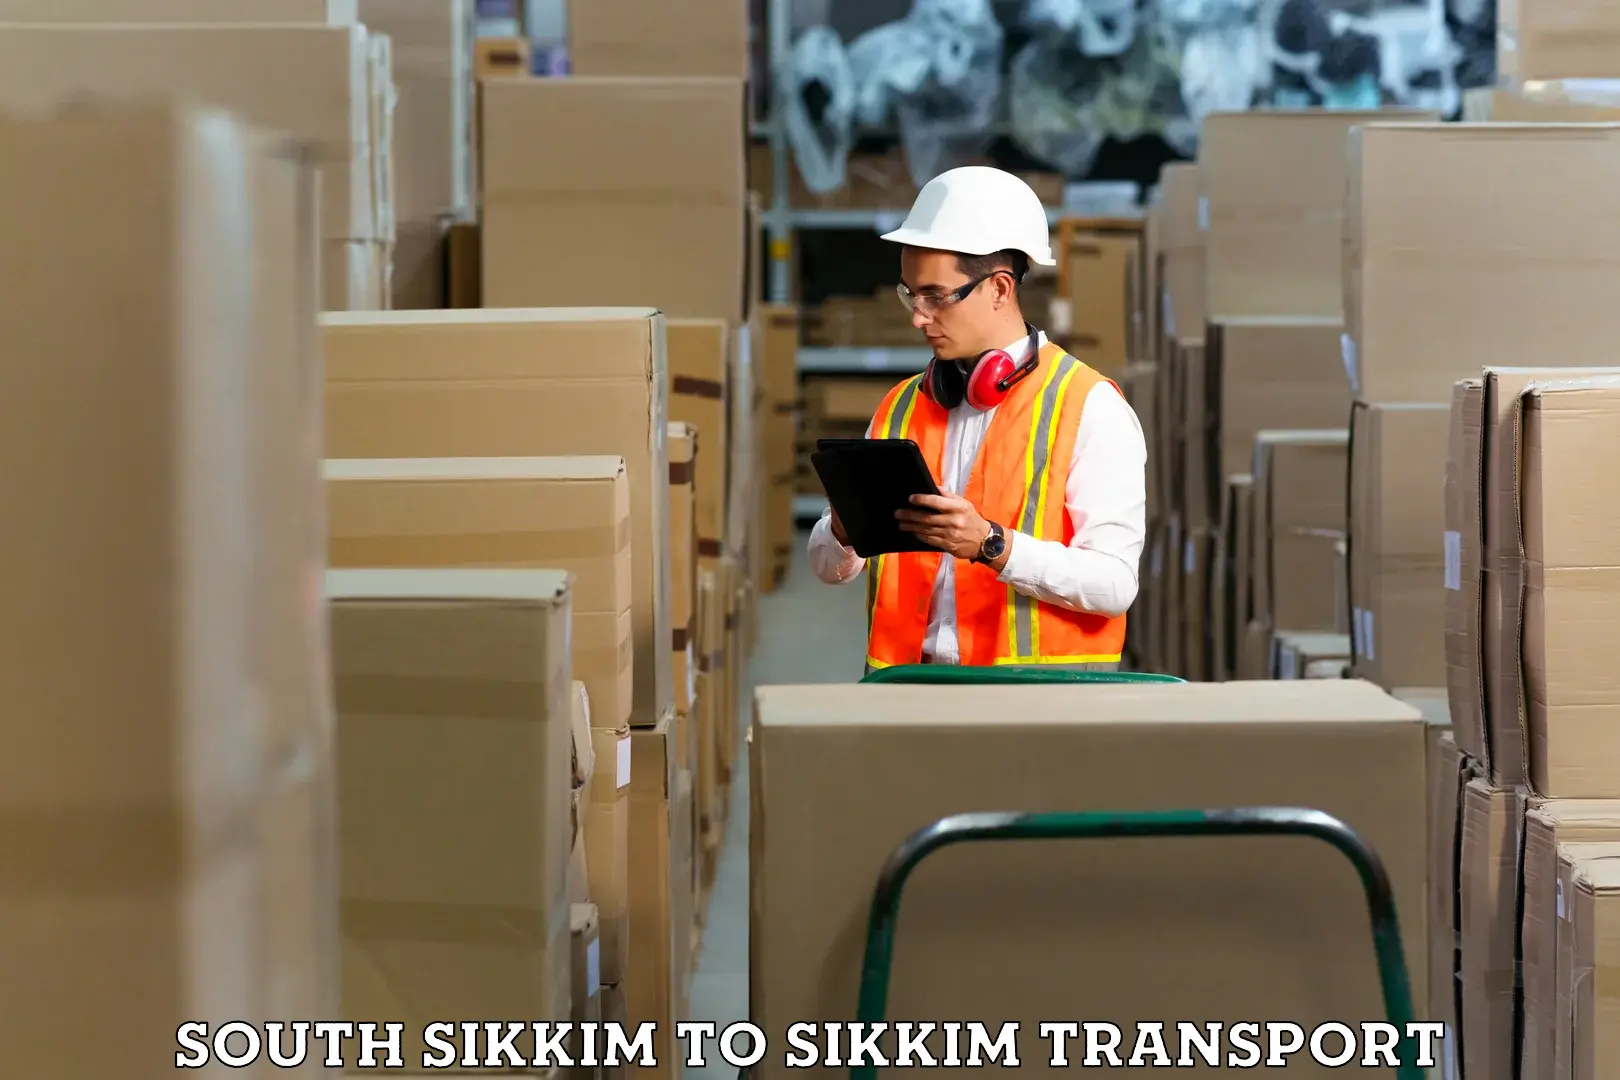 Daily transport service South Sikkim to South Sikkim